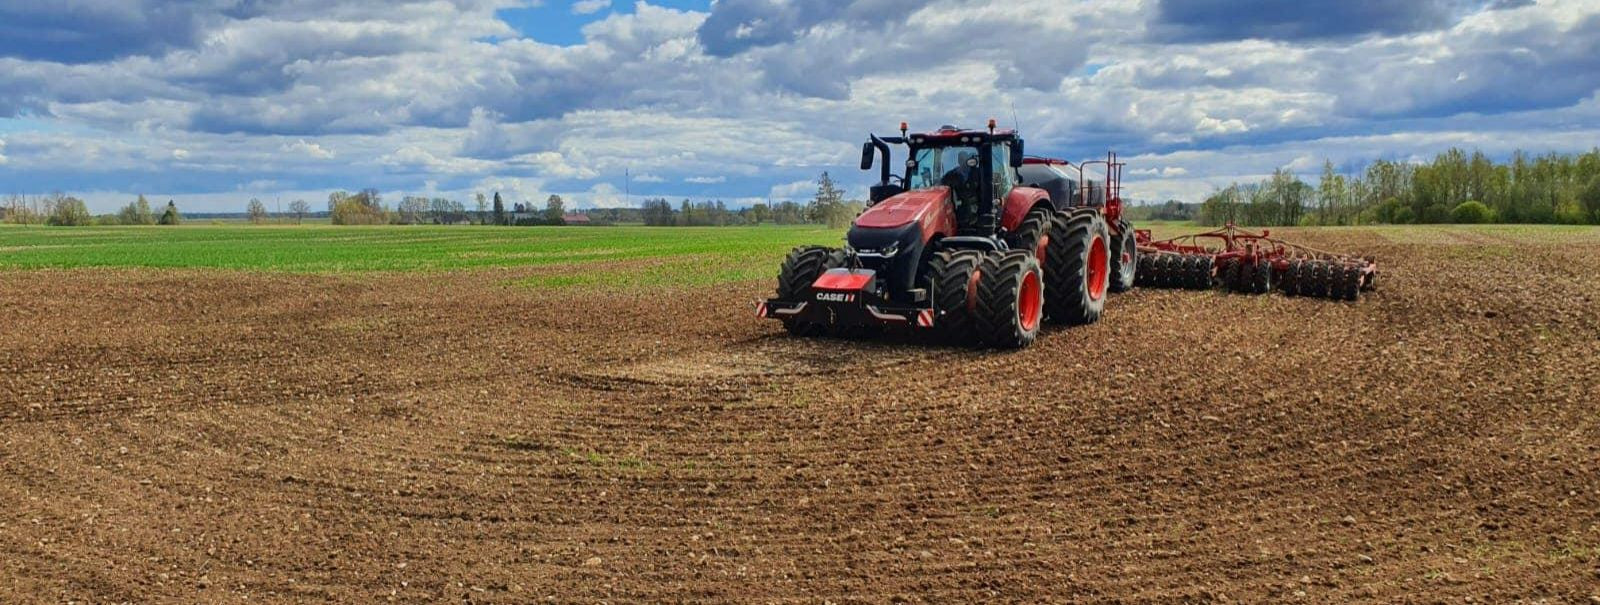 Sowing is the critical first step in the agricultural cycle, setting the stage for the entire growing season. The method and precision of sowing seeds can signi